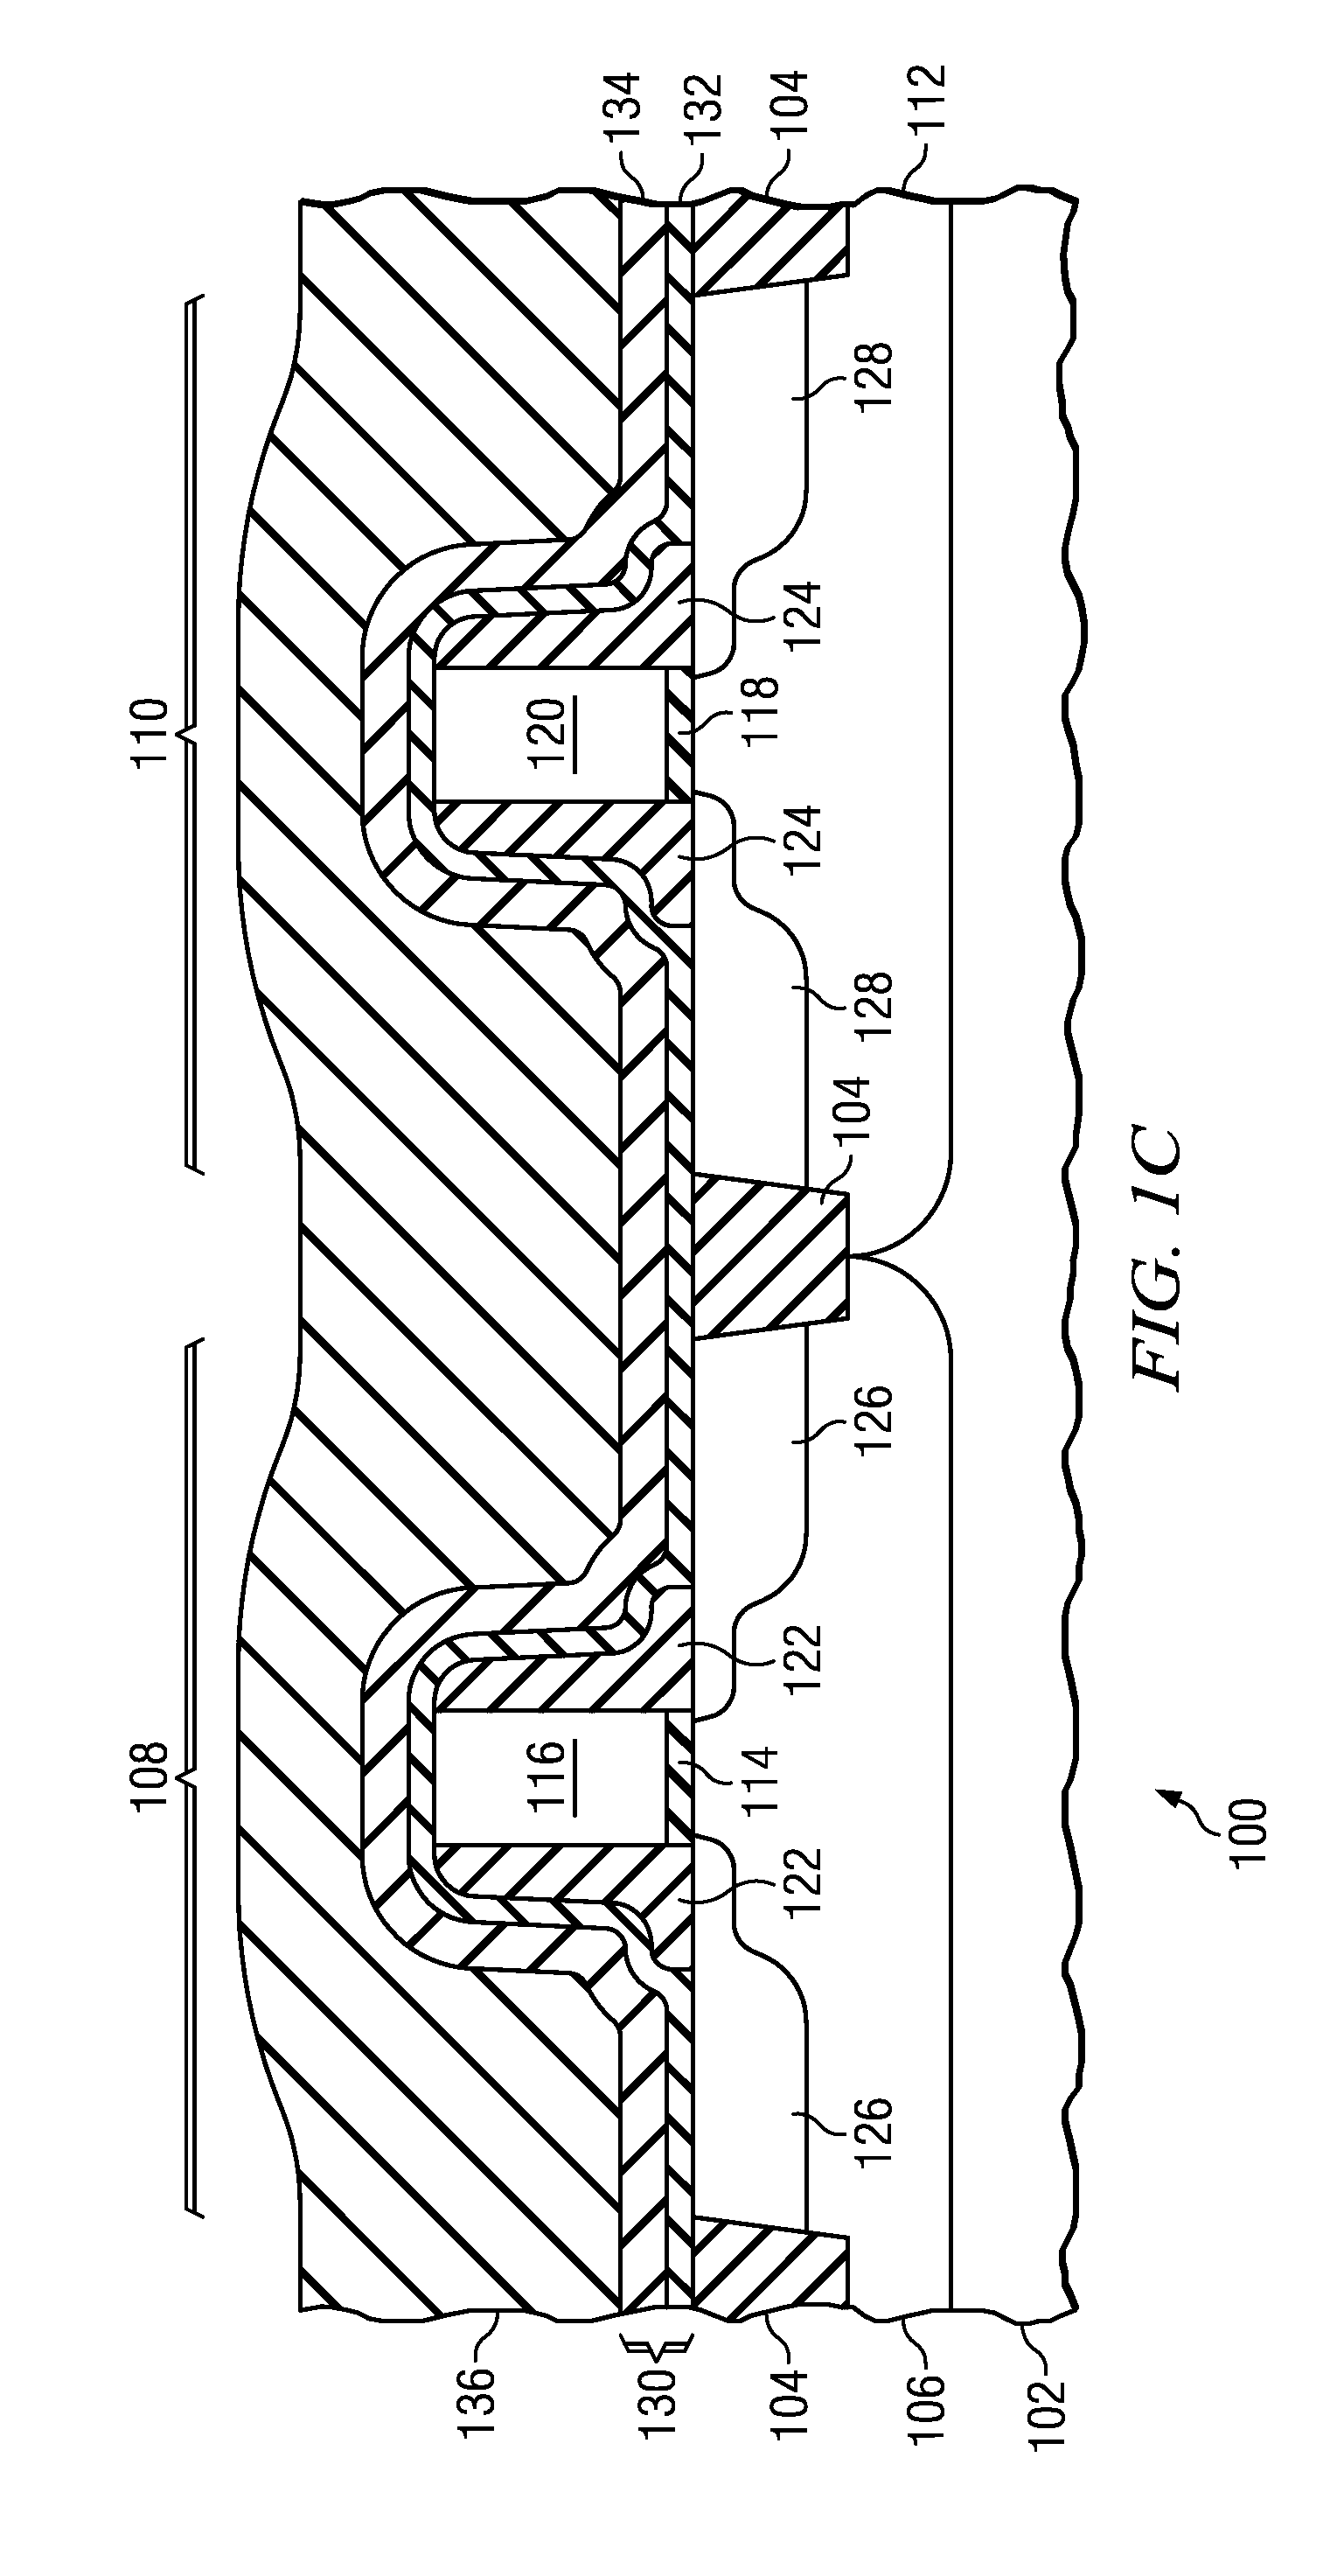 Method to attain low defectivity fully silicided gates